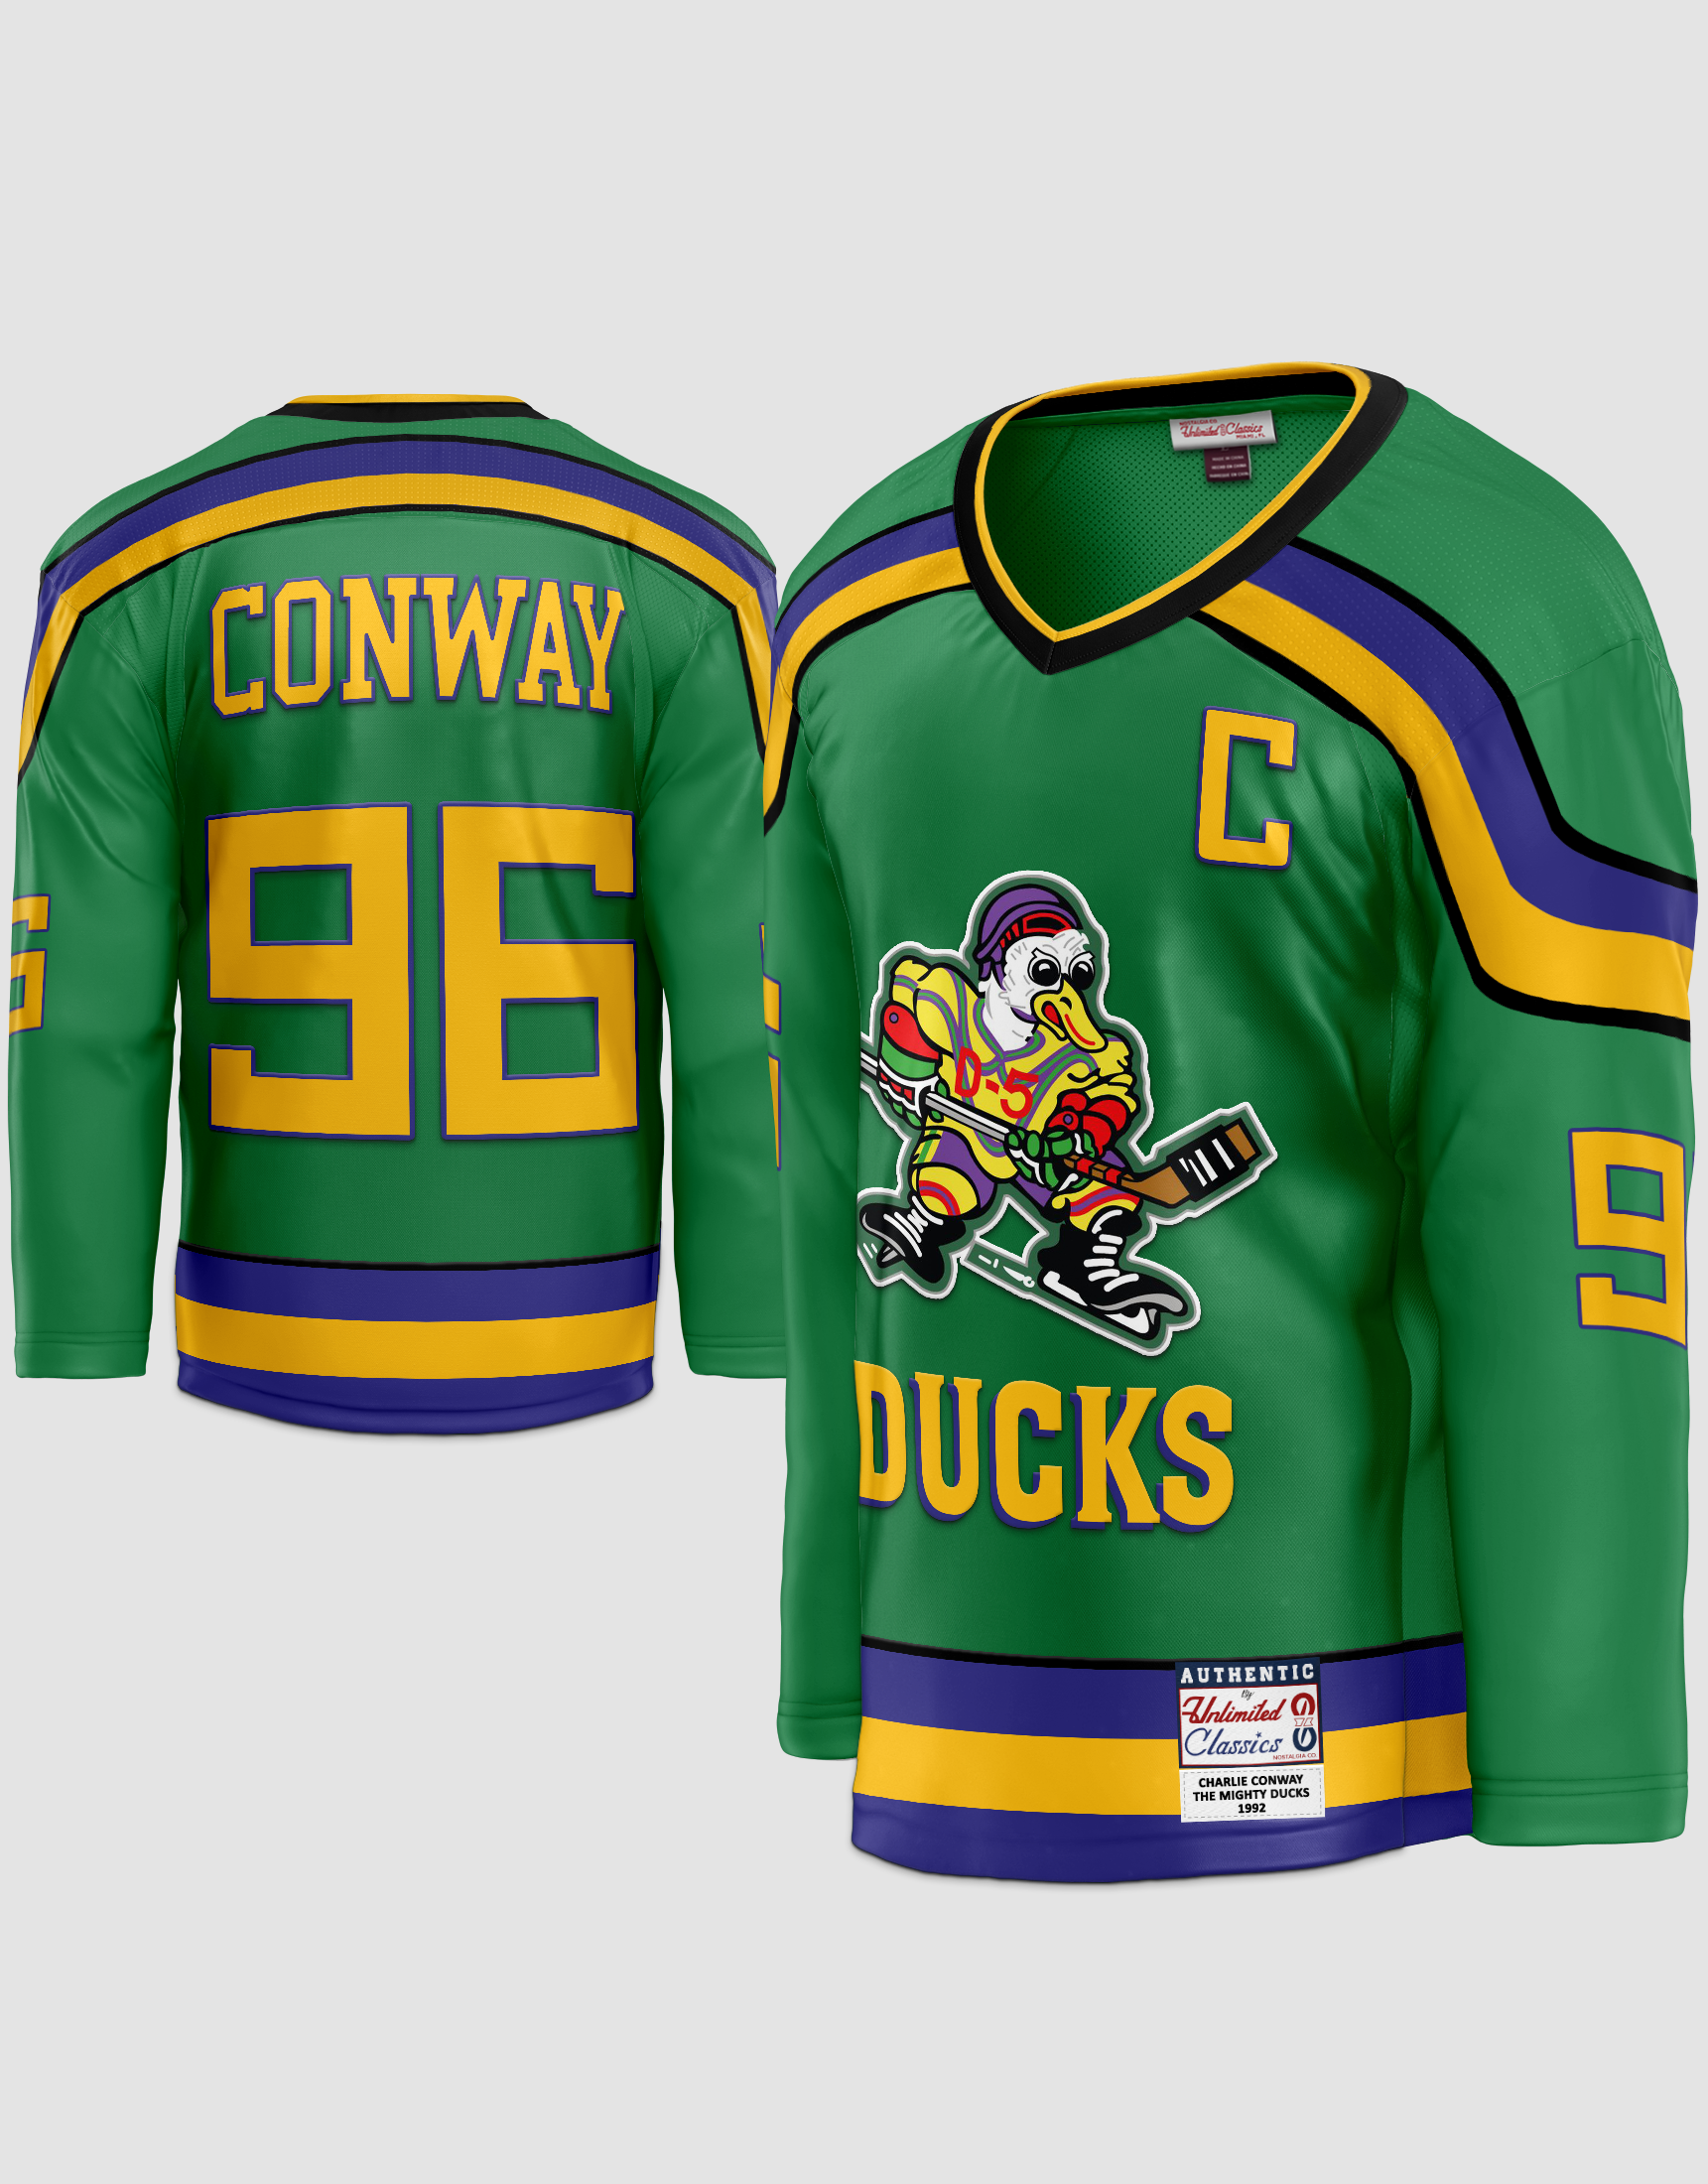 NHL 23 receives The Mighty Ducks in-game content